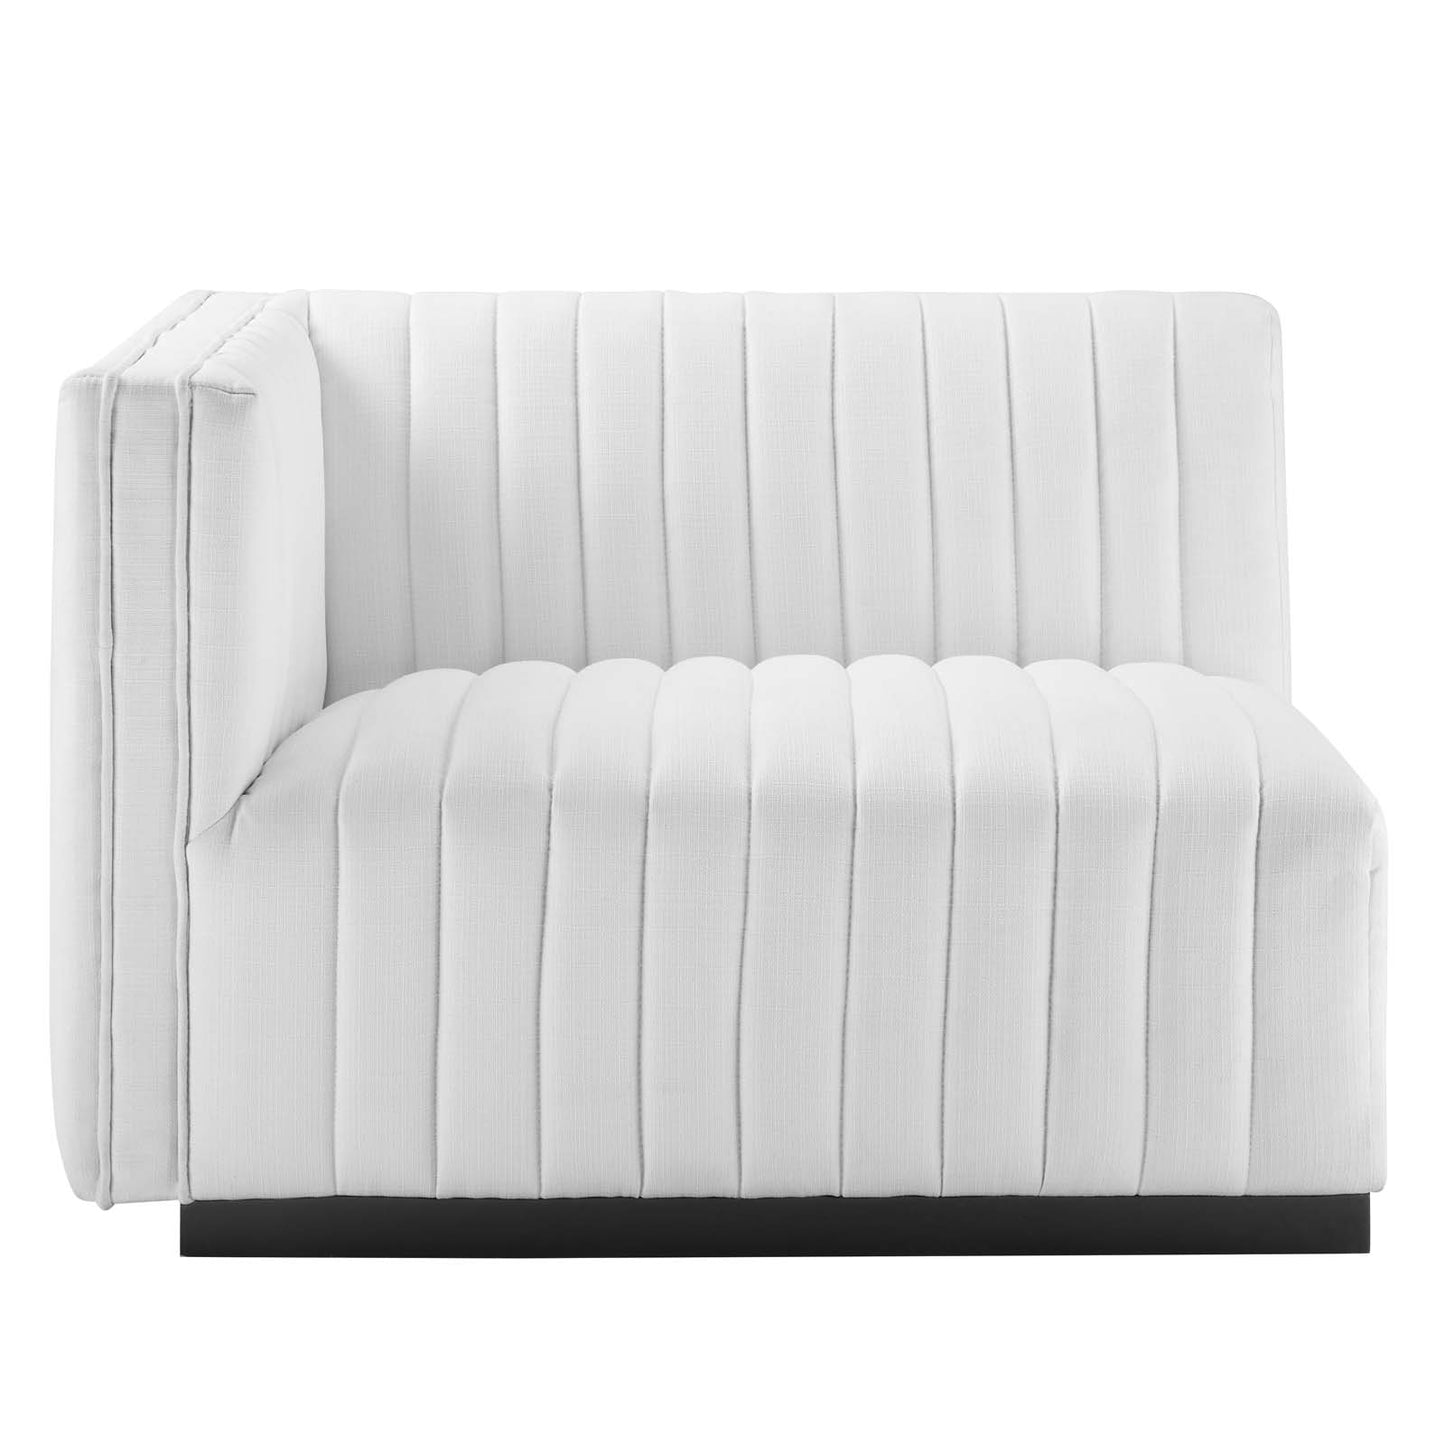 Conjure Channel Tufted Upholstered Fabric Left-Arm Chair Black White EEI-5491-BLK-WHI